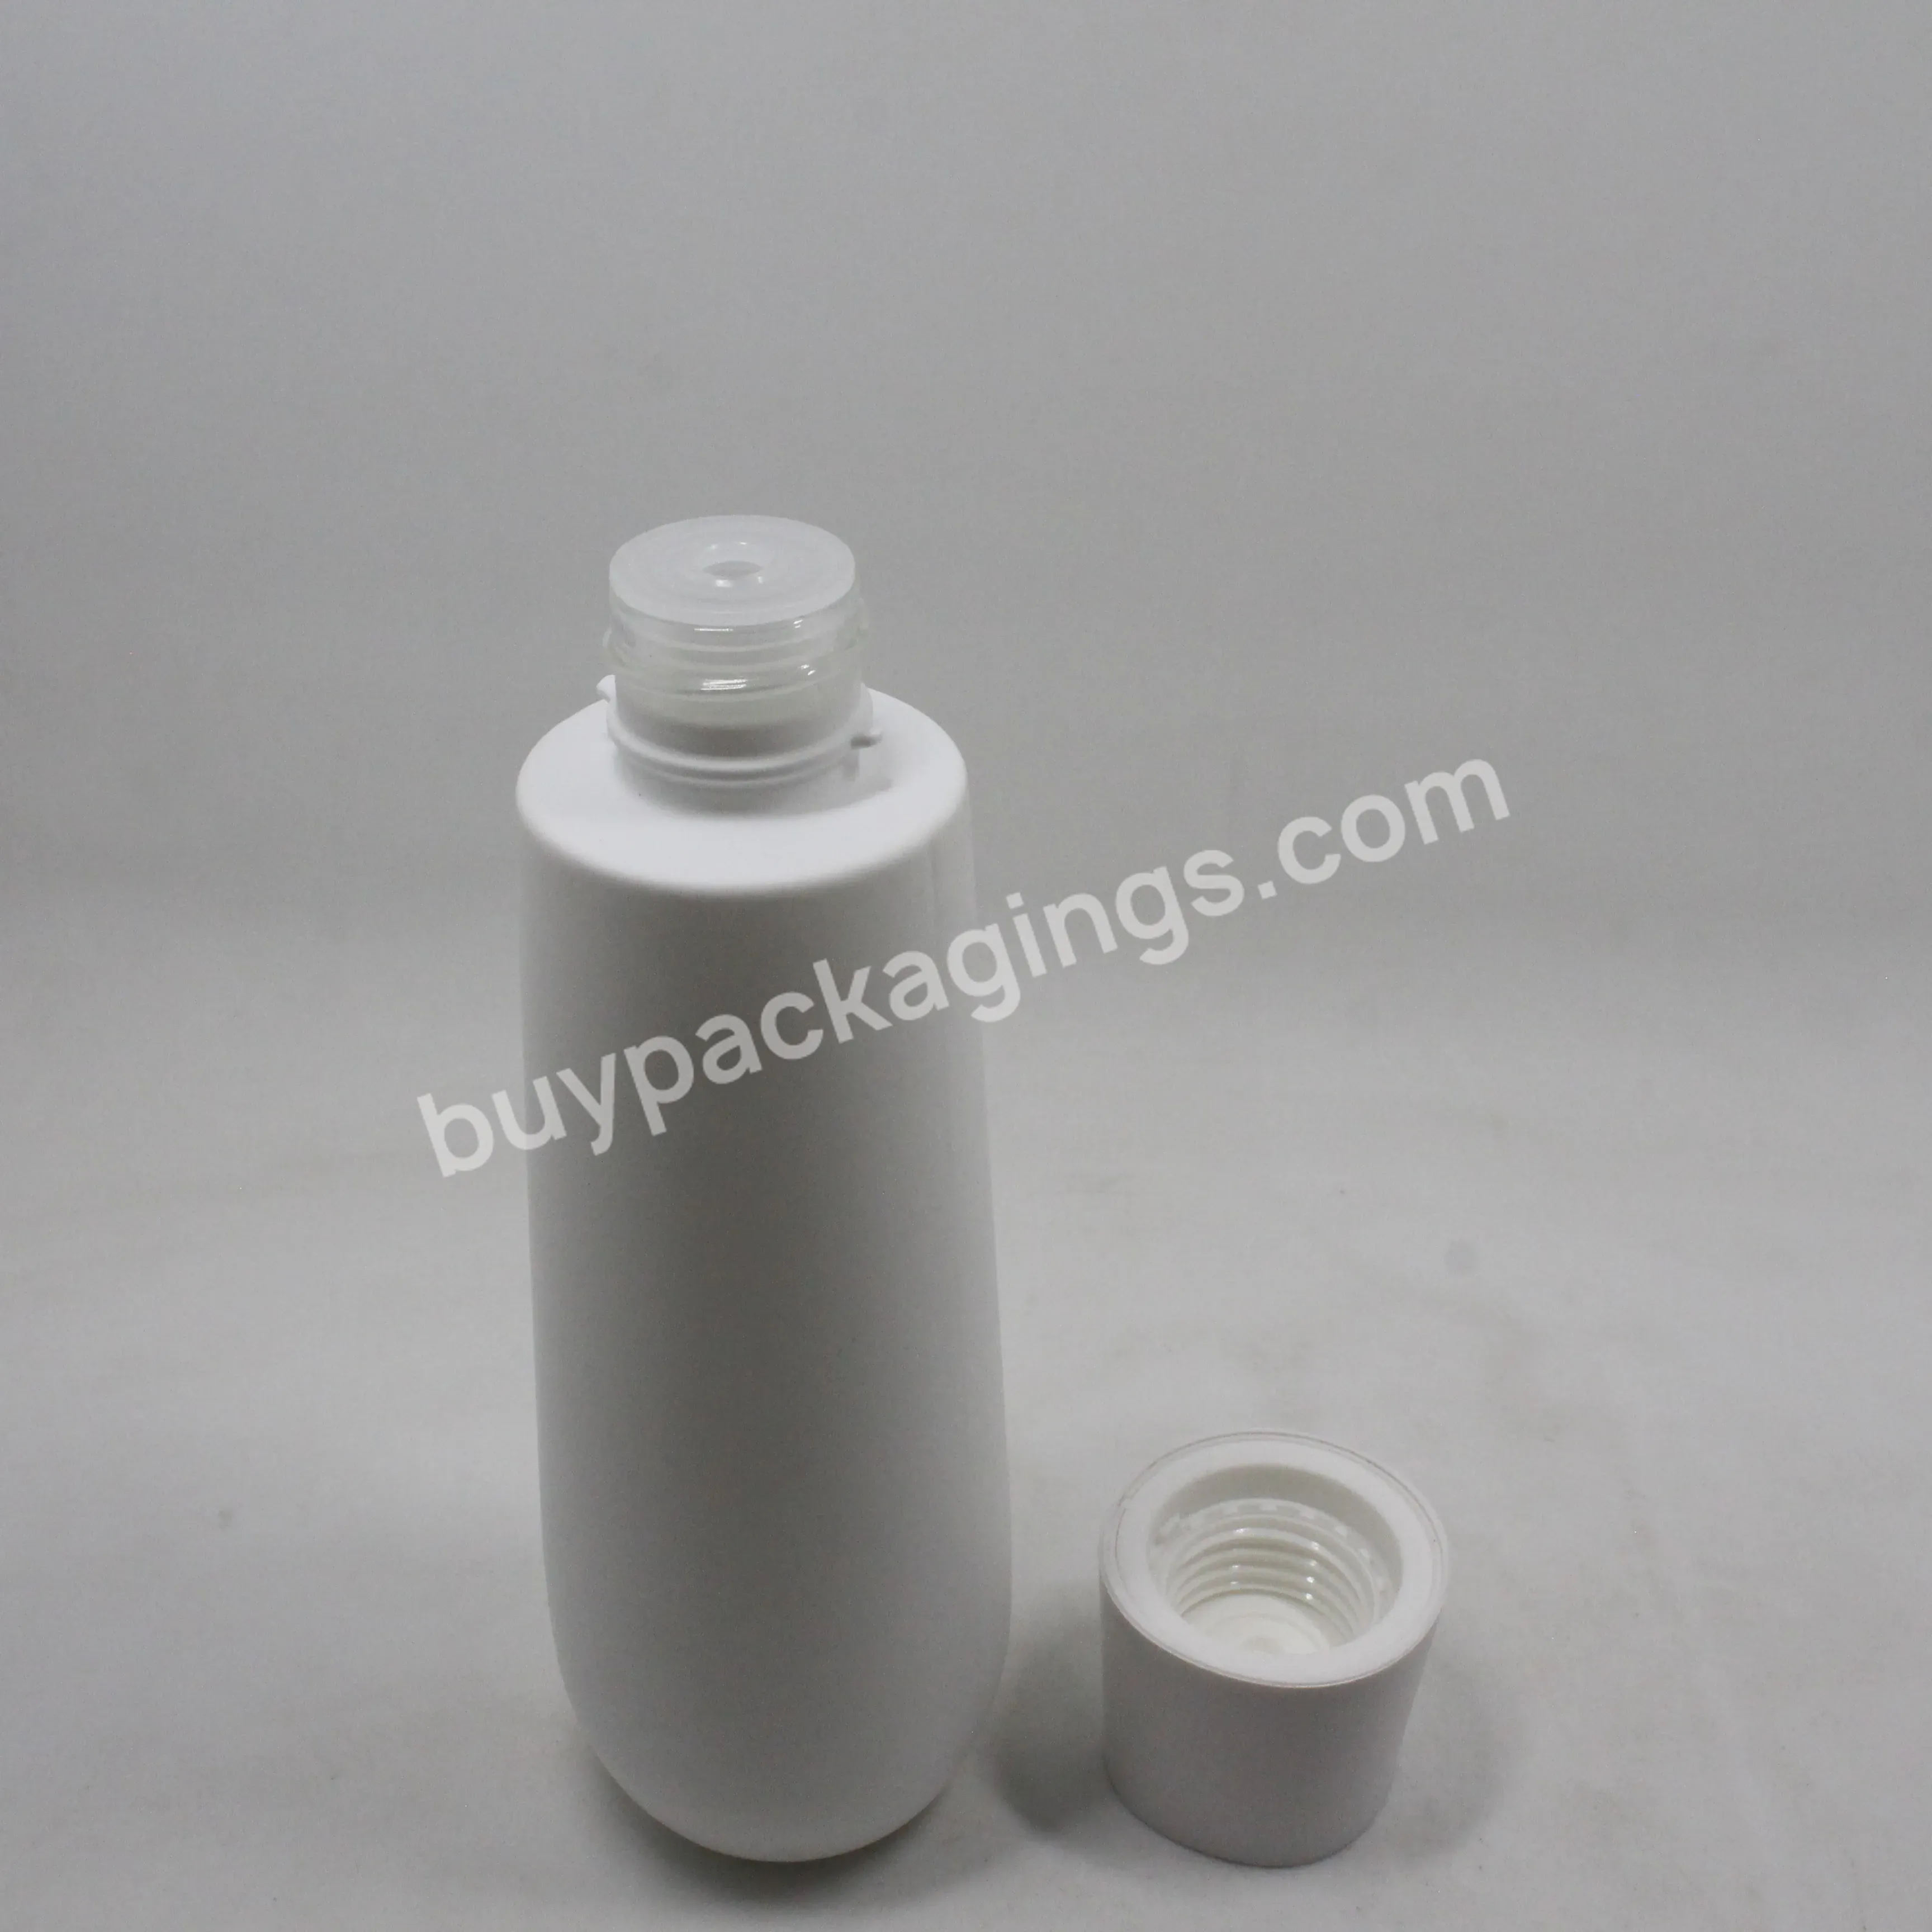 Lotion Caps Cosmetic Containers Glass Bottle Jar Set Empty Square Pump Bottles 40ml 100ml Beauty Cosmetics - Buy Cosmetic Jar Bamboo,Bamboo Jar Cosmetic,Glass Jar Bamboo Cap.